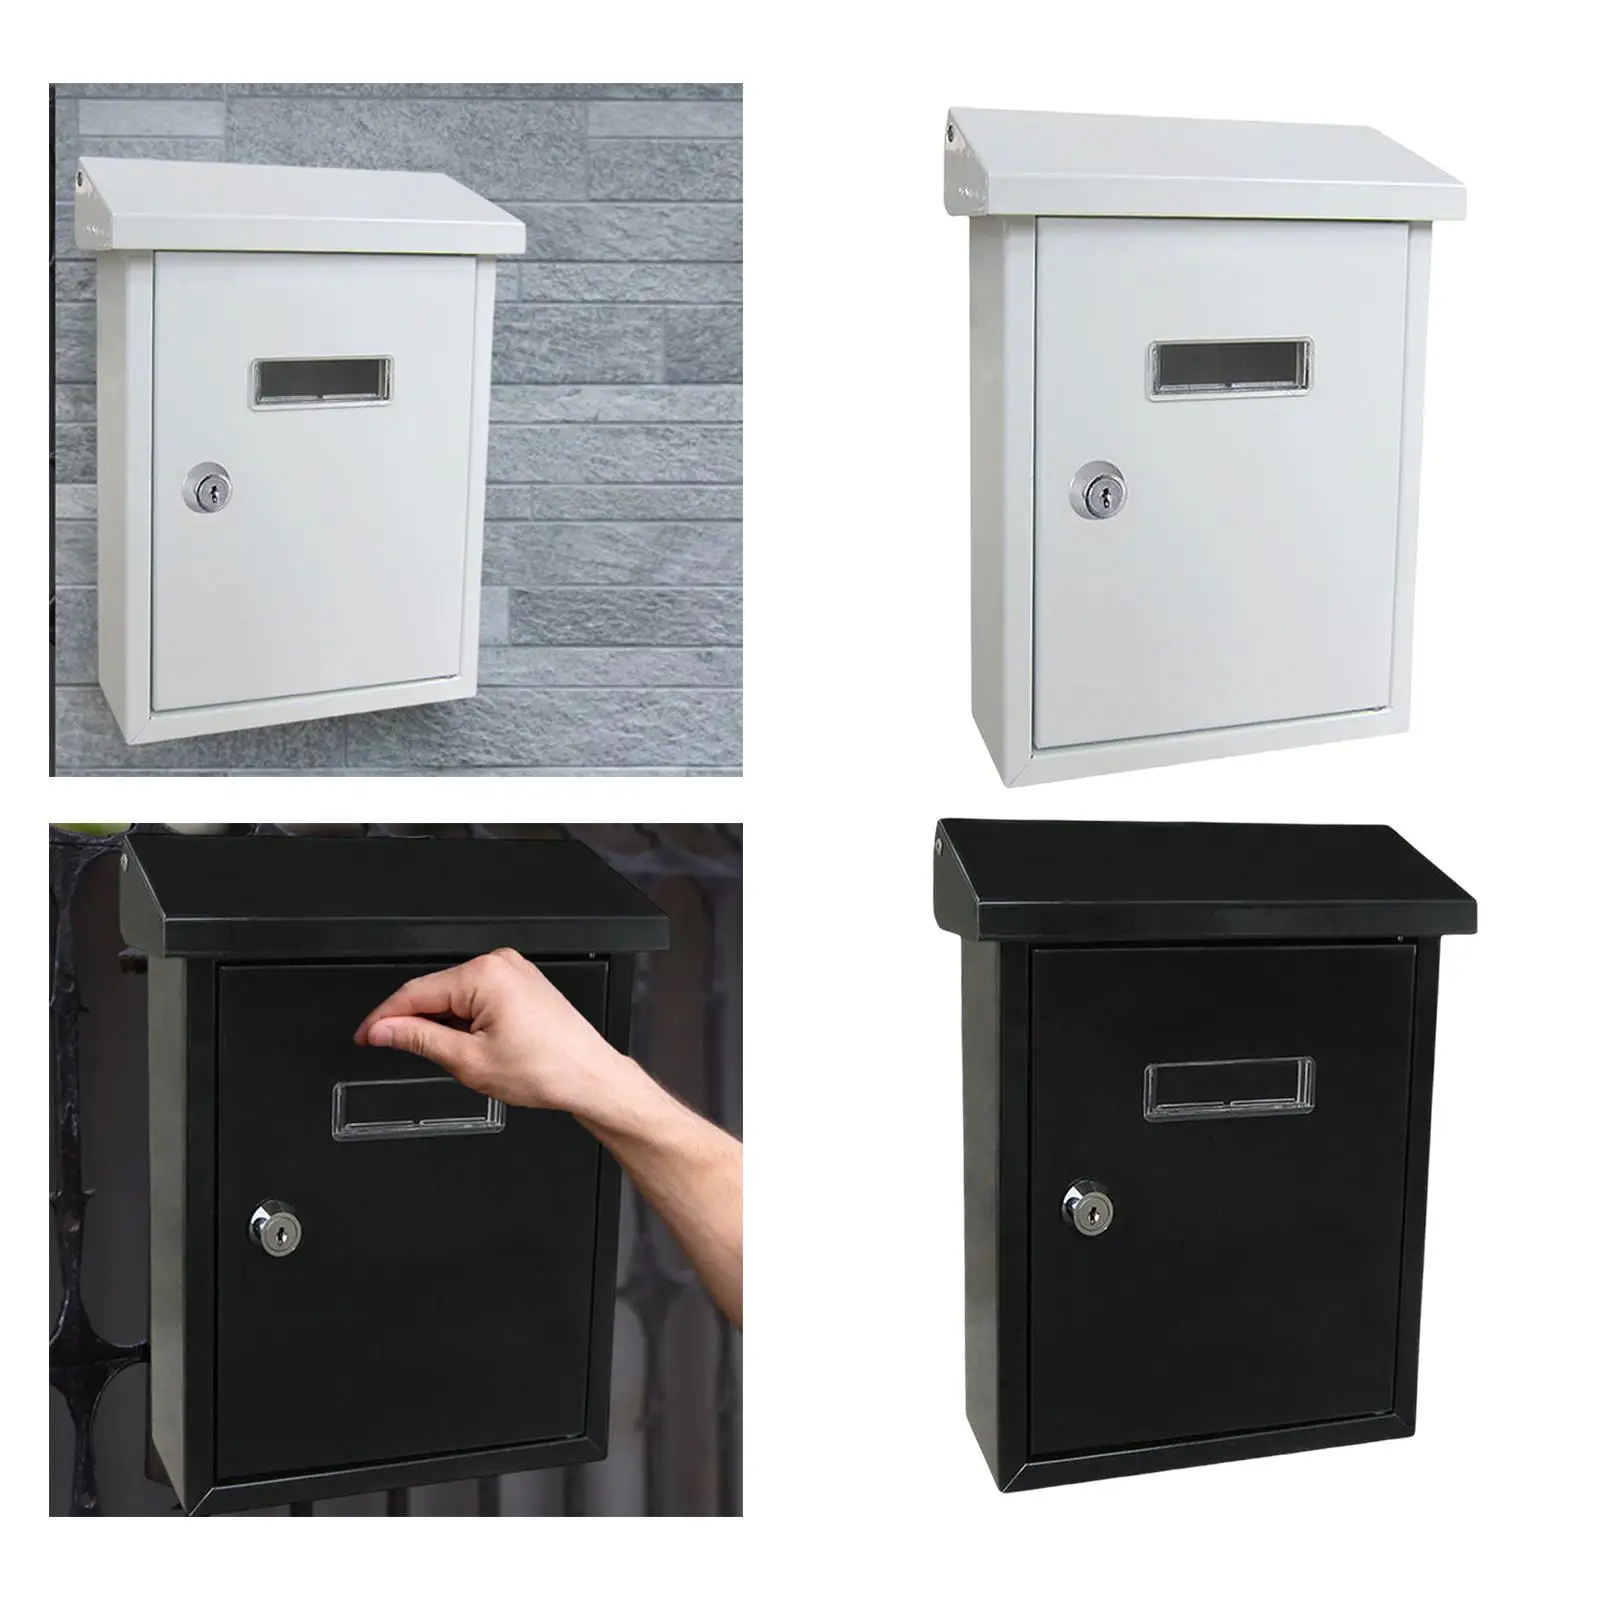 Locking Wall Mount Mailbox Metal Decorative Letterbox Outdoor Mail Box for Porch Outside Decorations Commercial Use Front Door